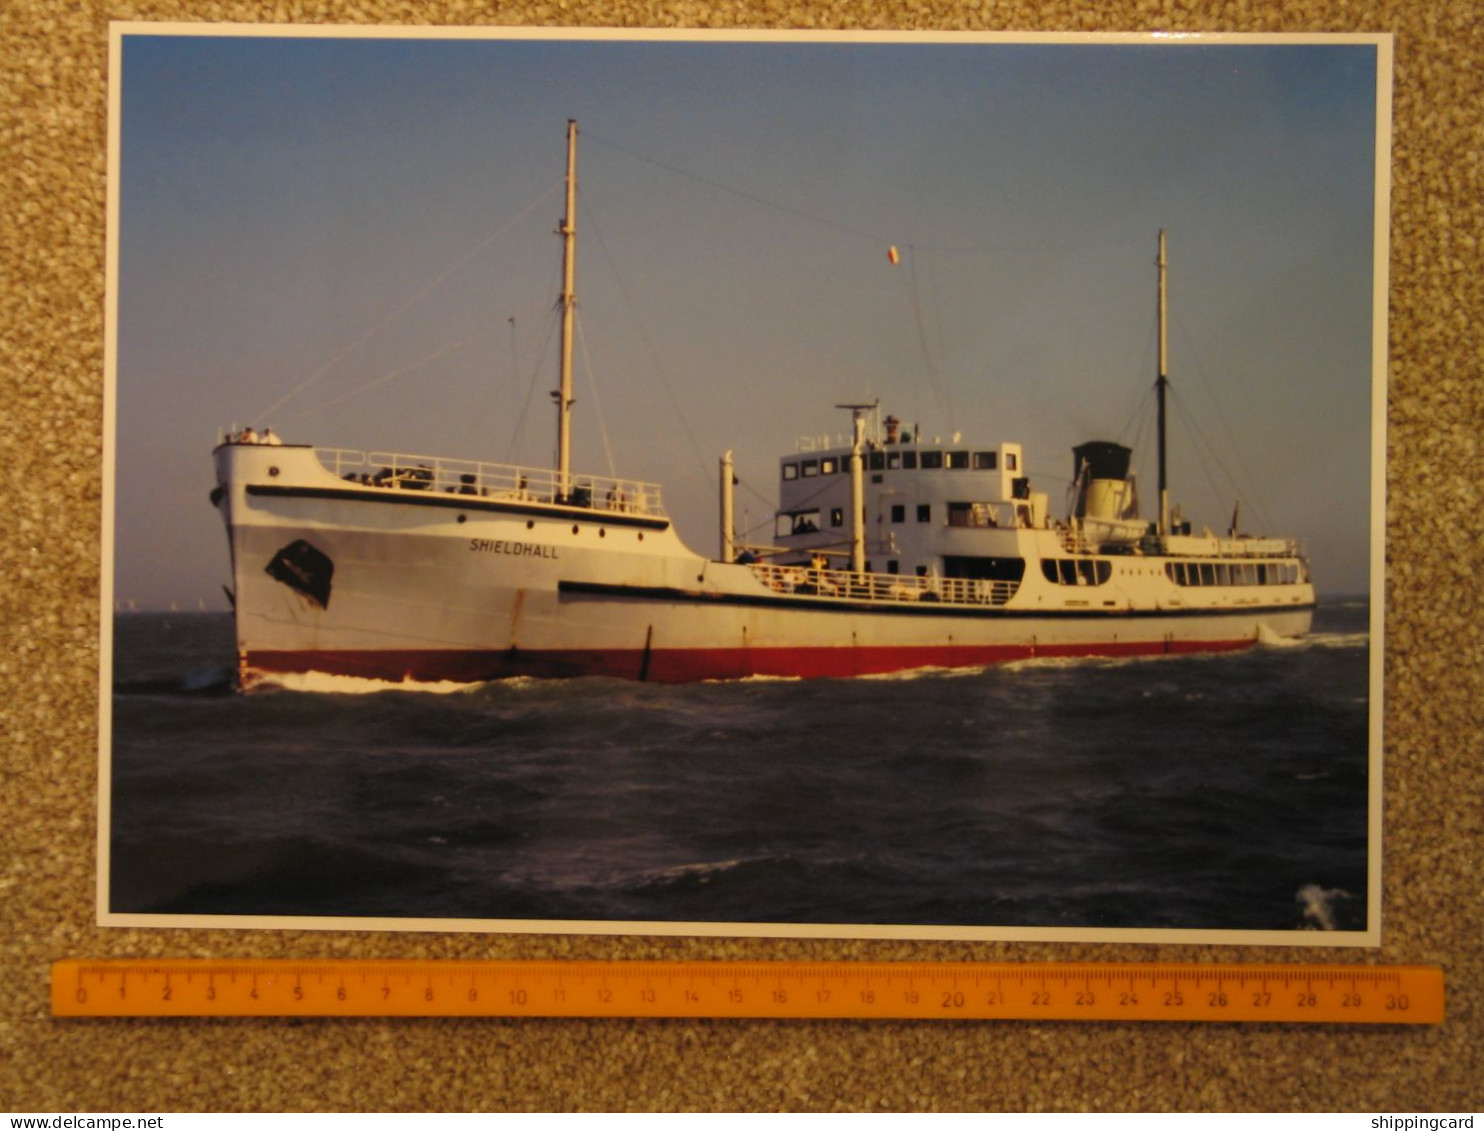 SHIELDHALL LARGE PHOTO - APPROX 200 X 300MM - Tanker